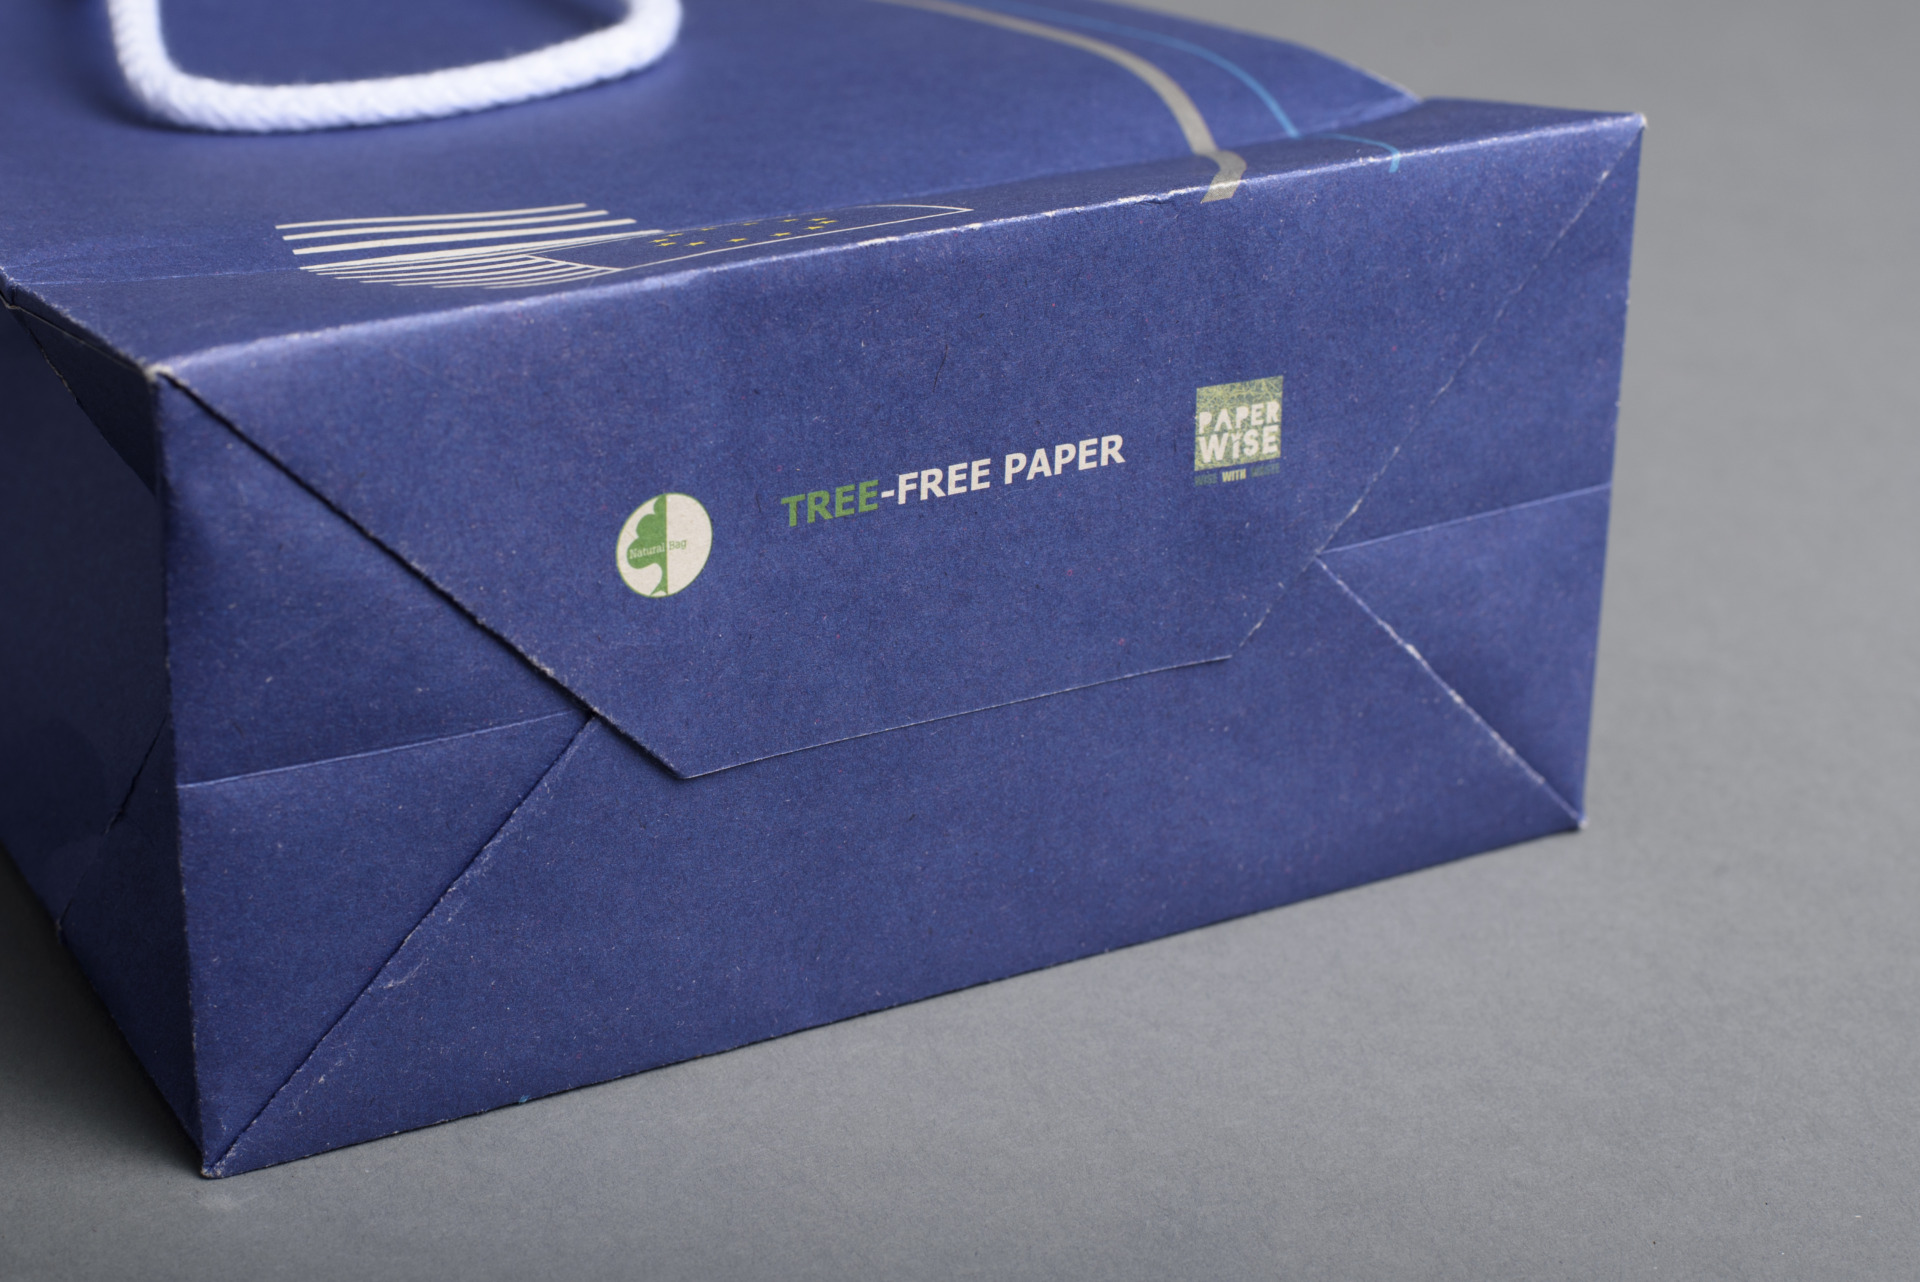 wp content uploads  0    0  eco friendly paper board agri waste paper bags co ntral treefree packaging natural bag ropean union 8